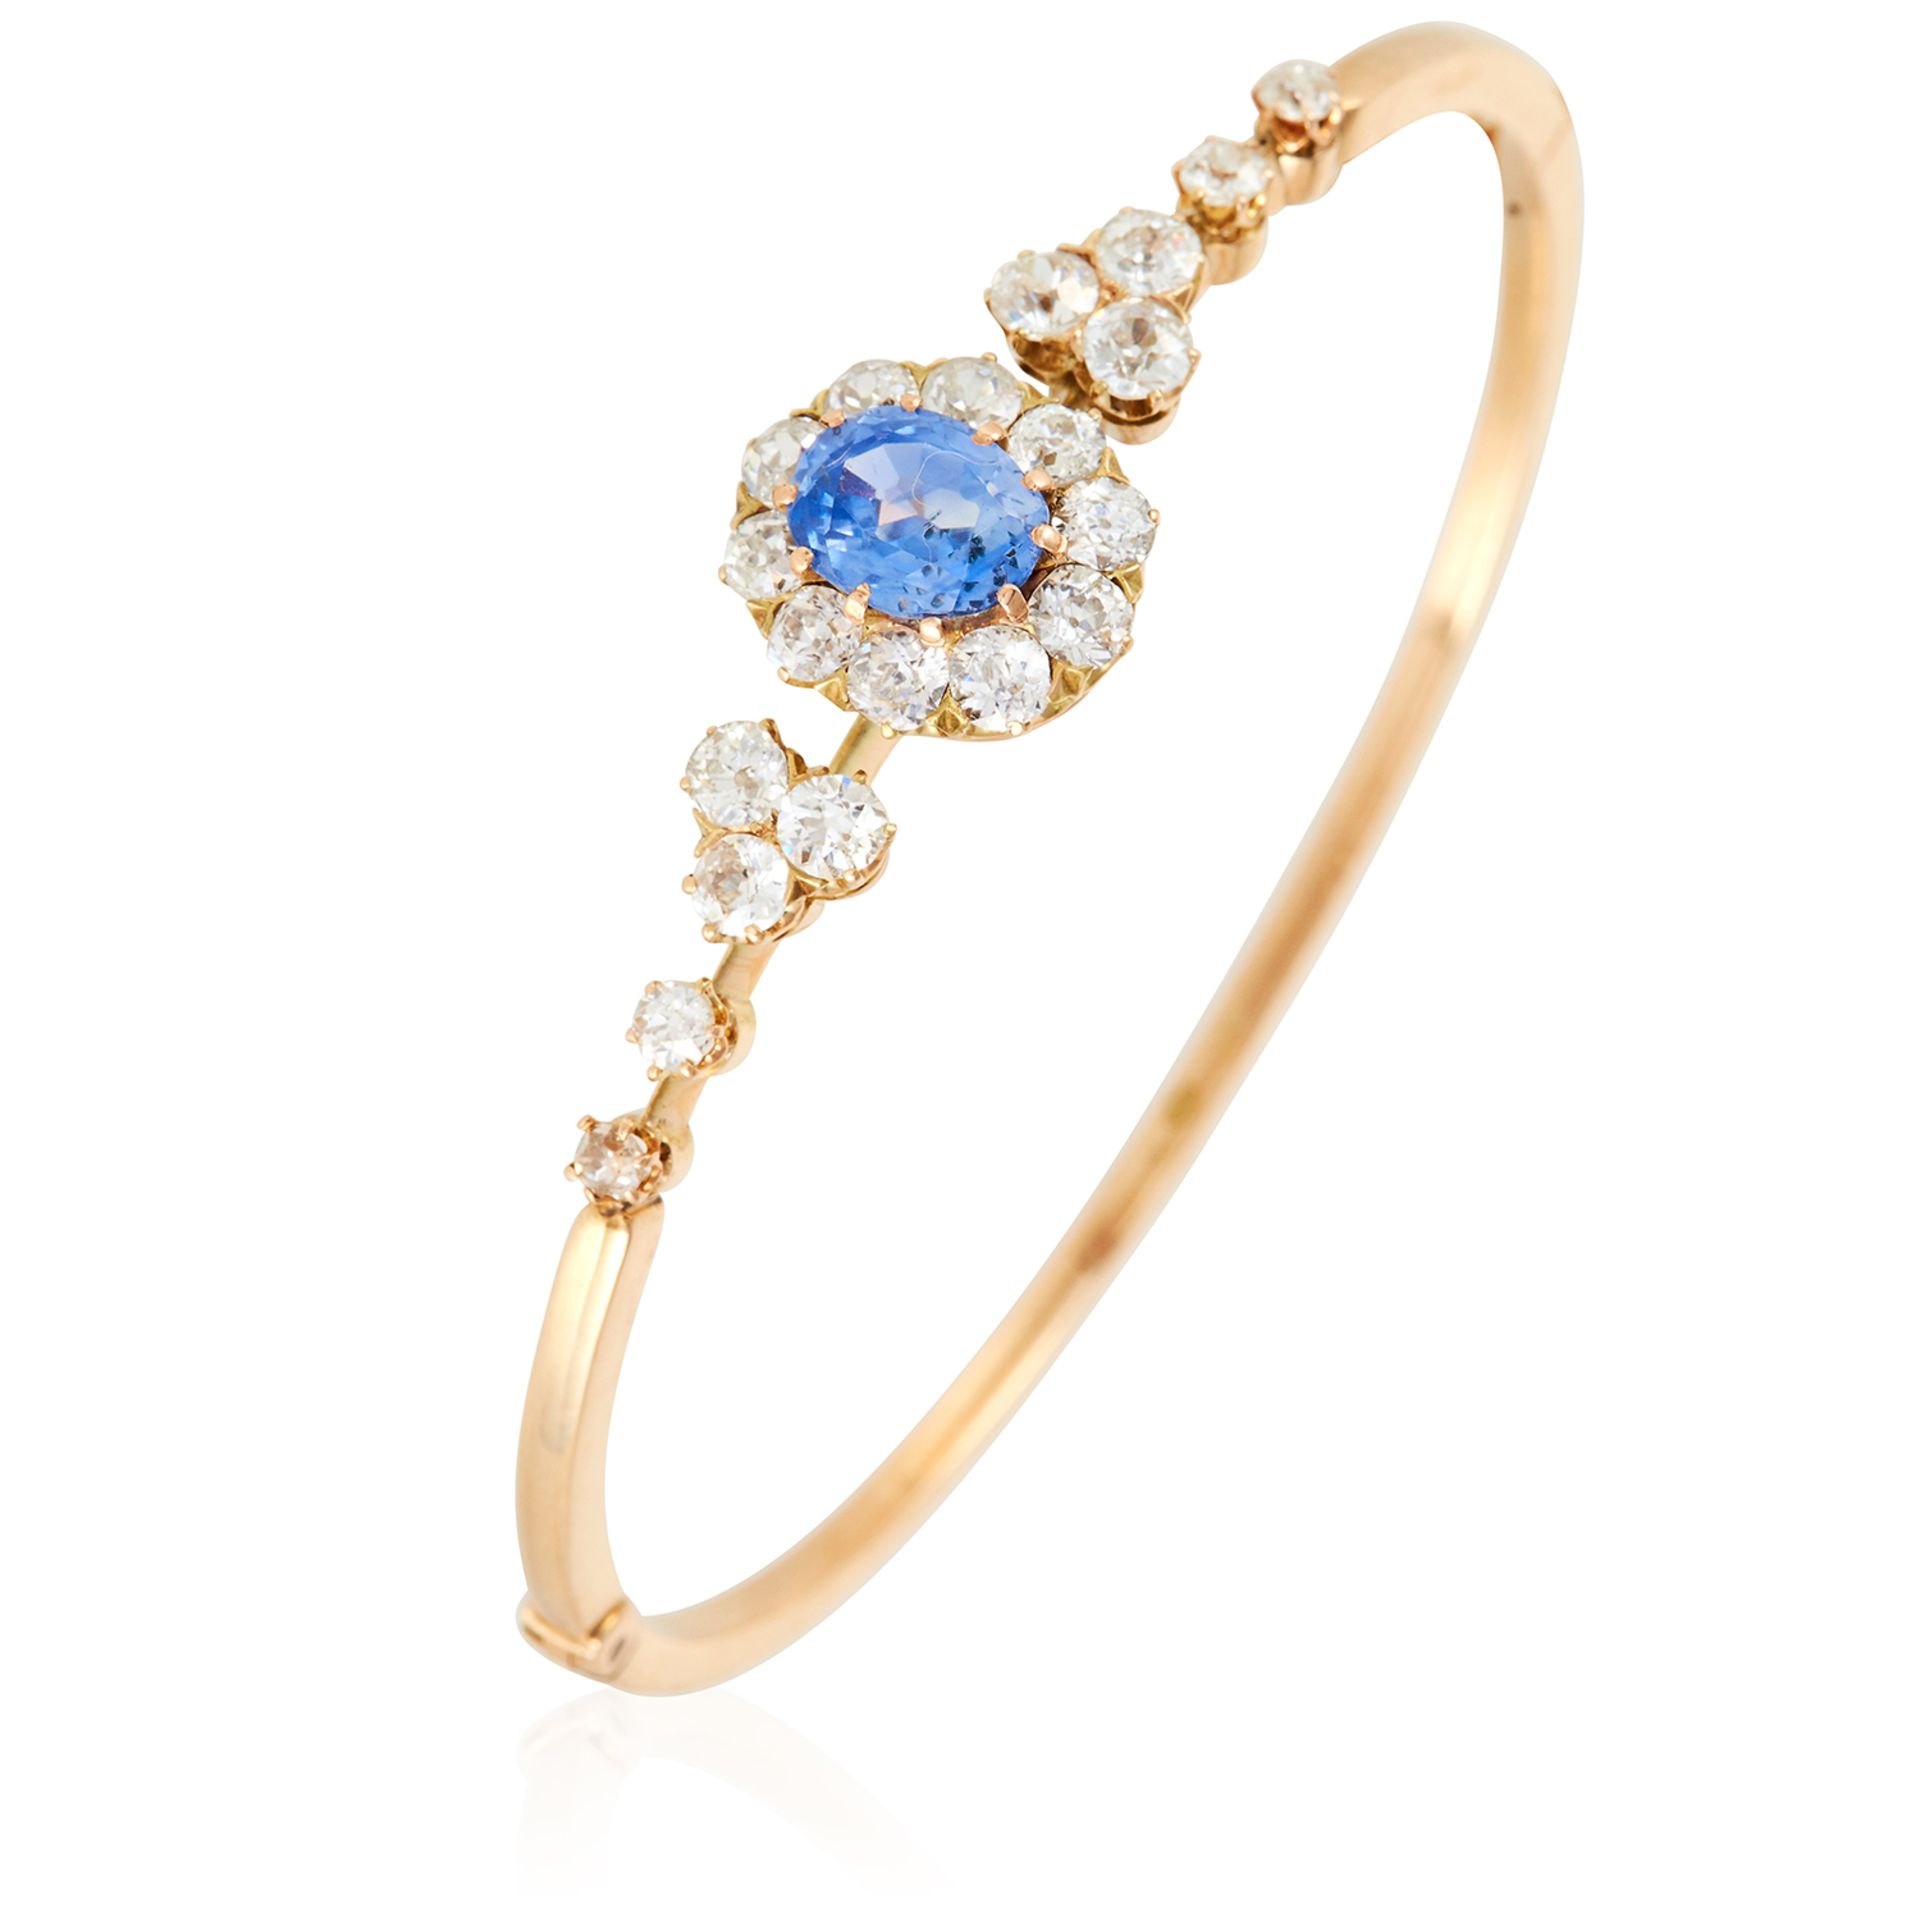 AN ANTIQUE CEYLON NO HEAT SAPPHIRE AND DIAMOND BANGLE in high carat yellow gold, set with an oval